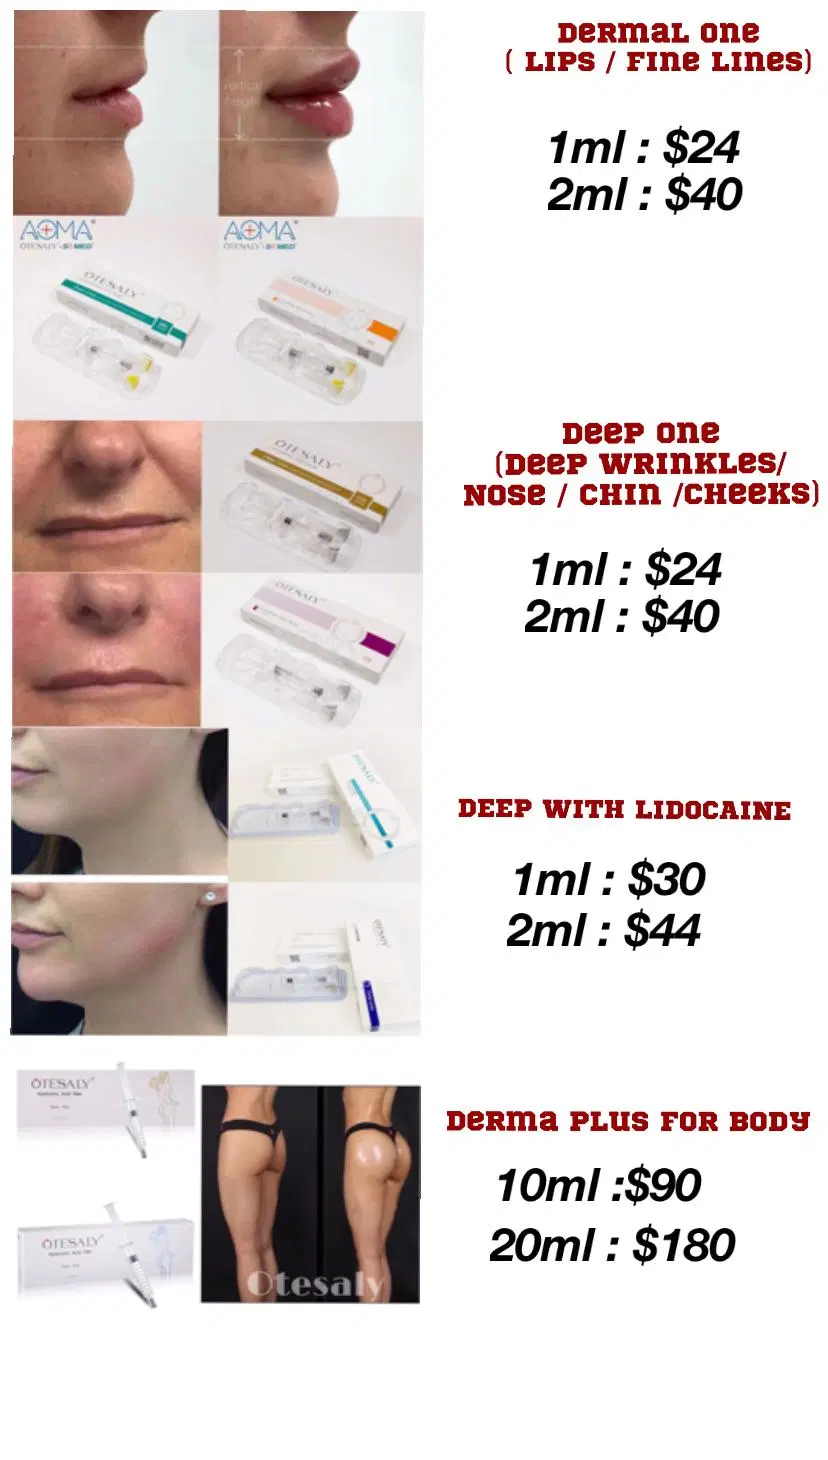 Otesaly Injectable Whitening Product Injection Mesotherapy and Anti-Wrinkle Whitening Liquid